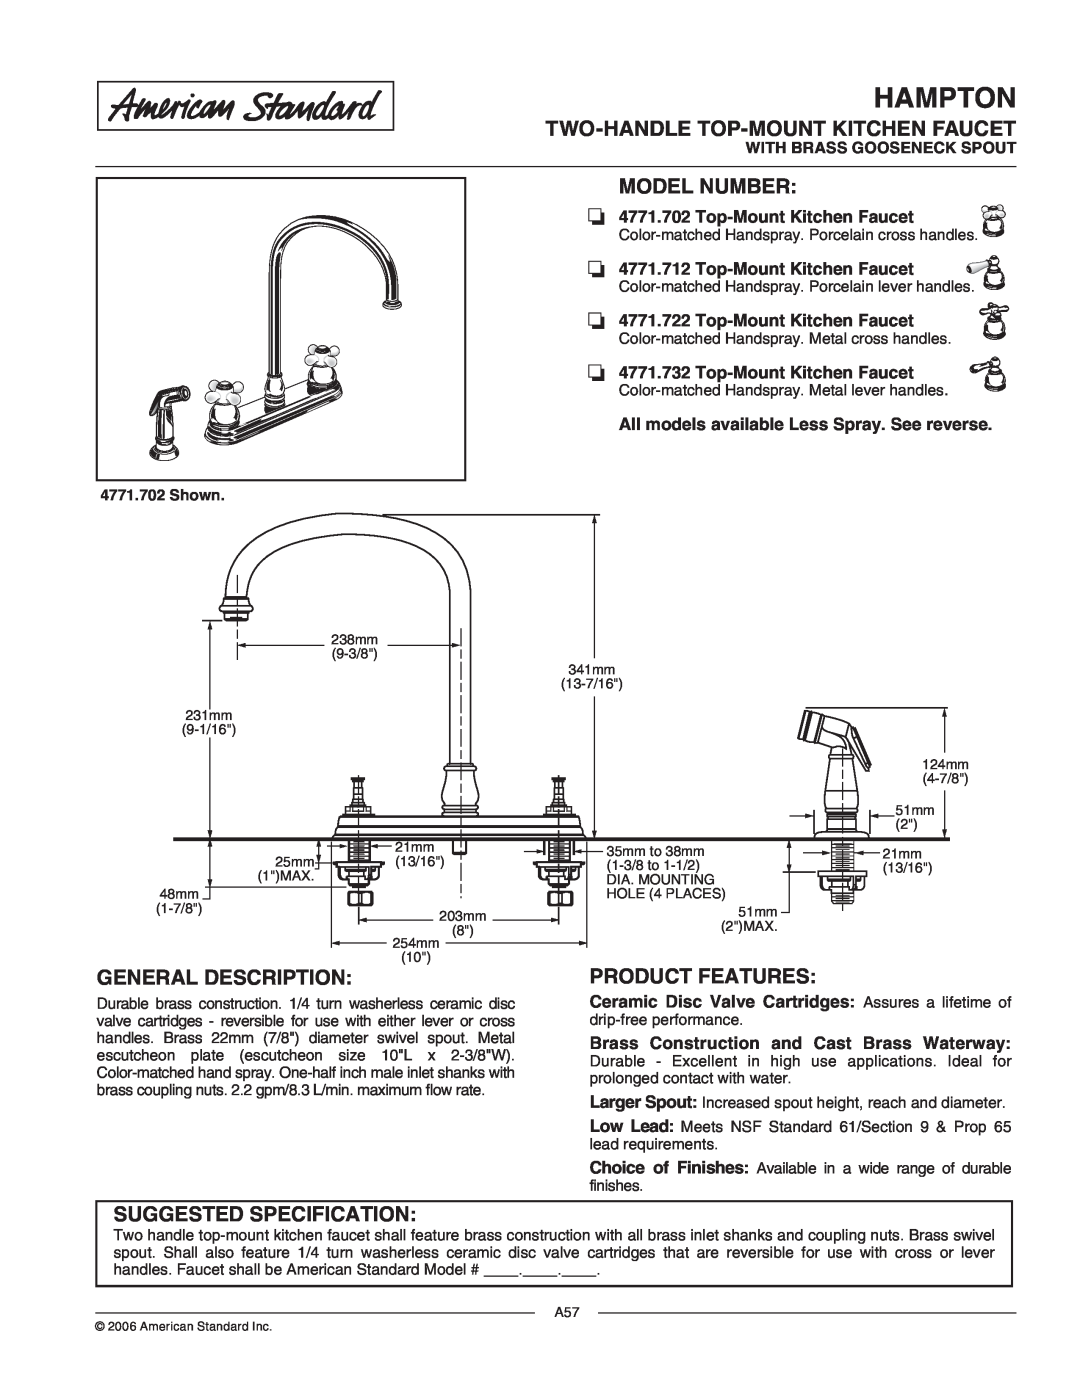 American Standard 4771.702 manual Hampton, Top-MountKitchen Faucet, All models available Less Spray. See reverse, Shown 